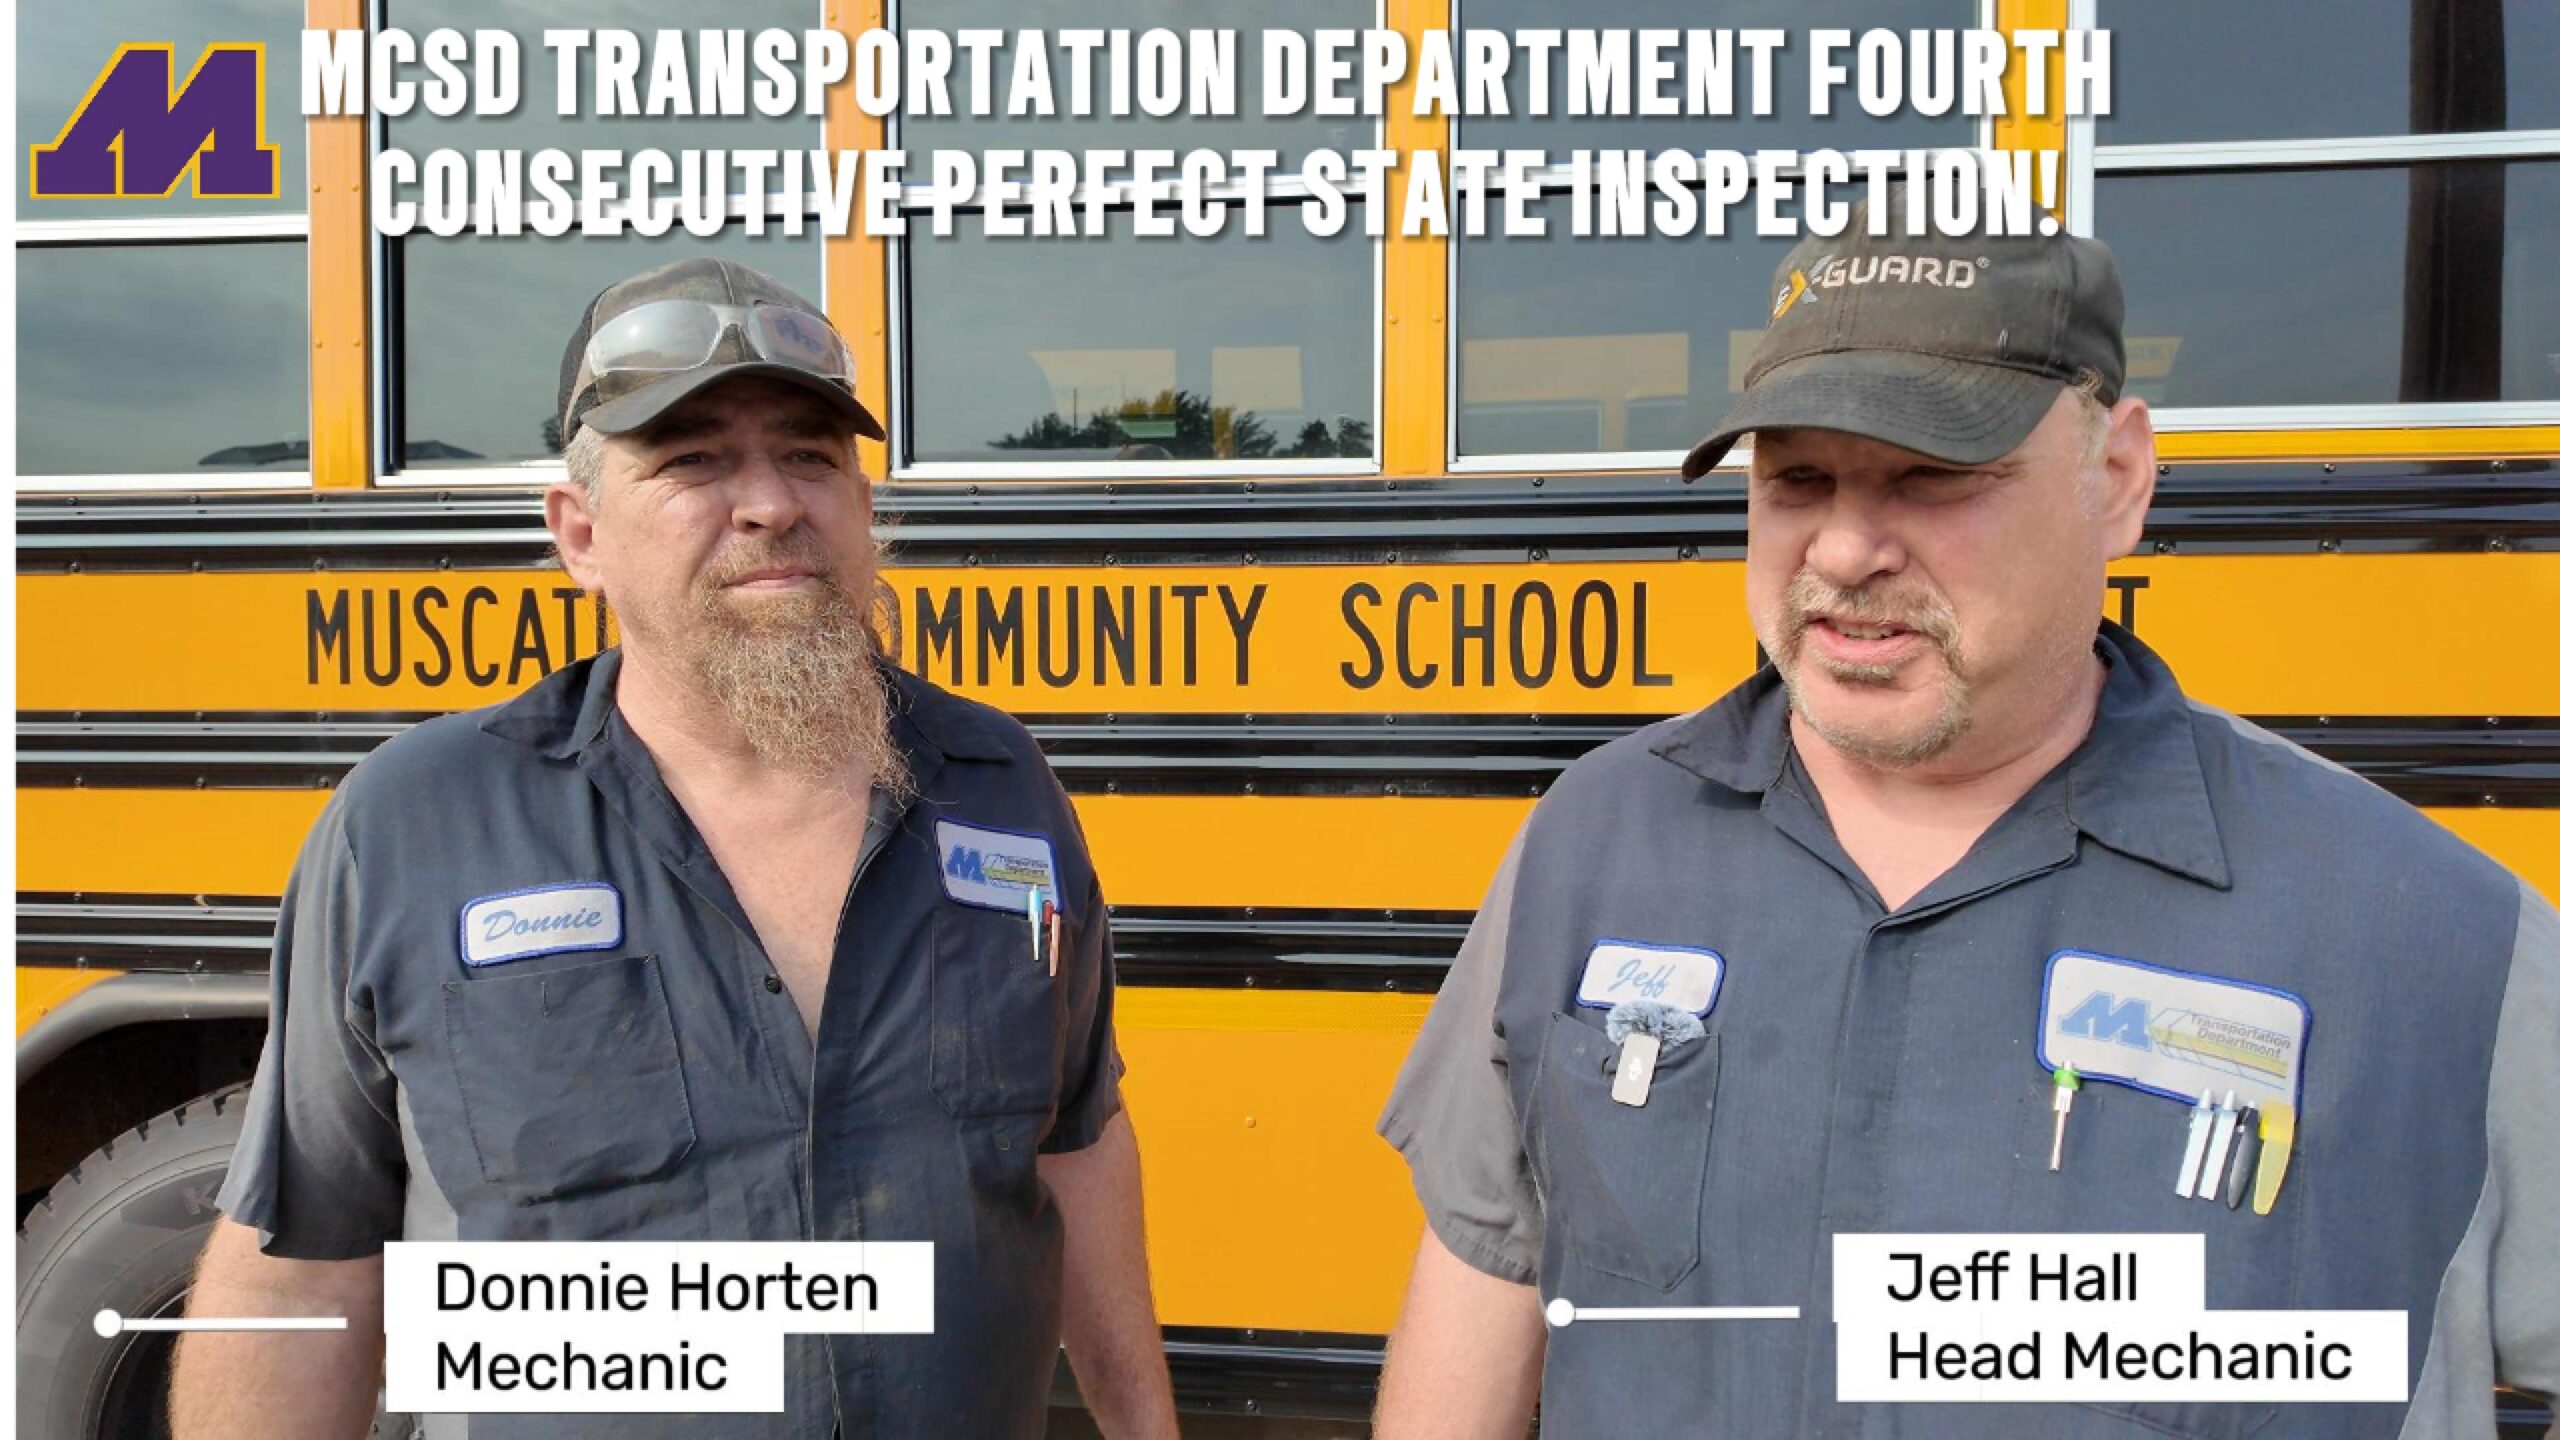 MCSD Transporation Department Receives Fourth Consecutive Flawless State Inspection!